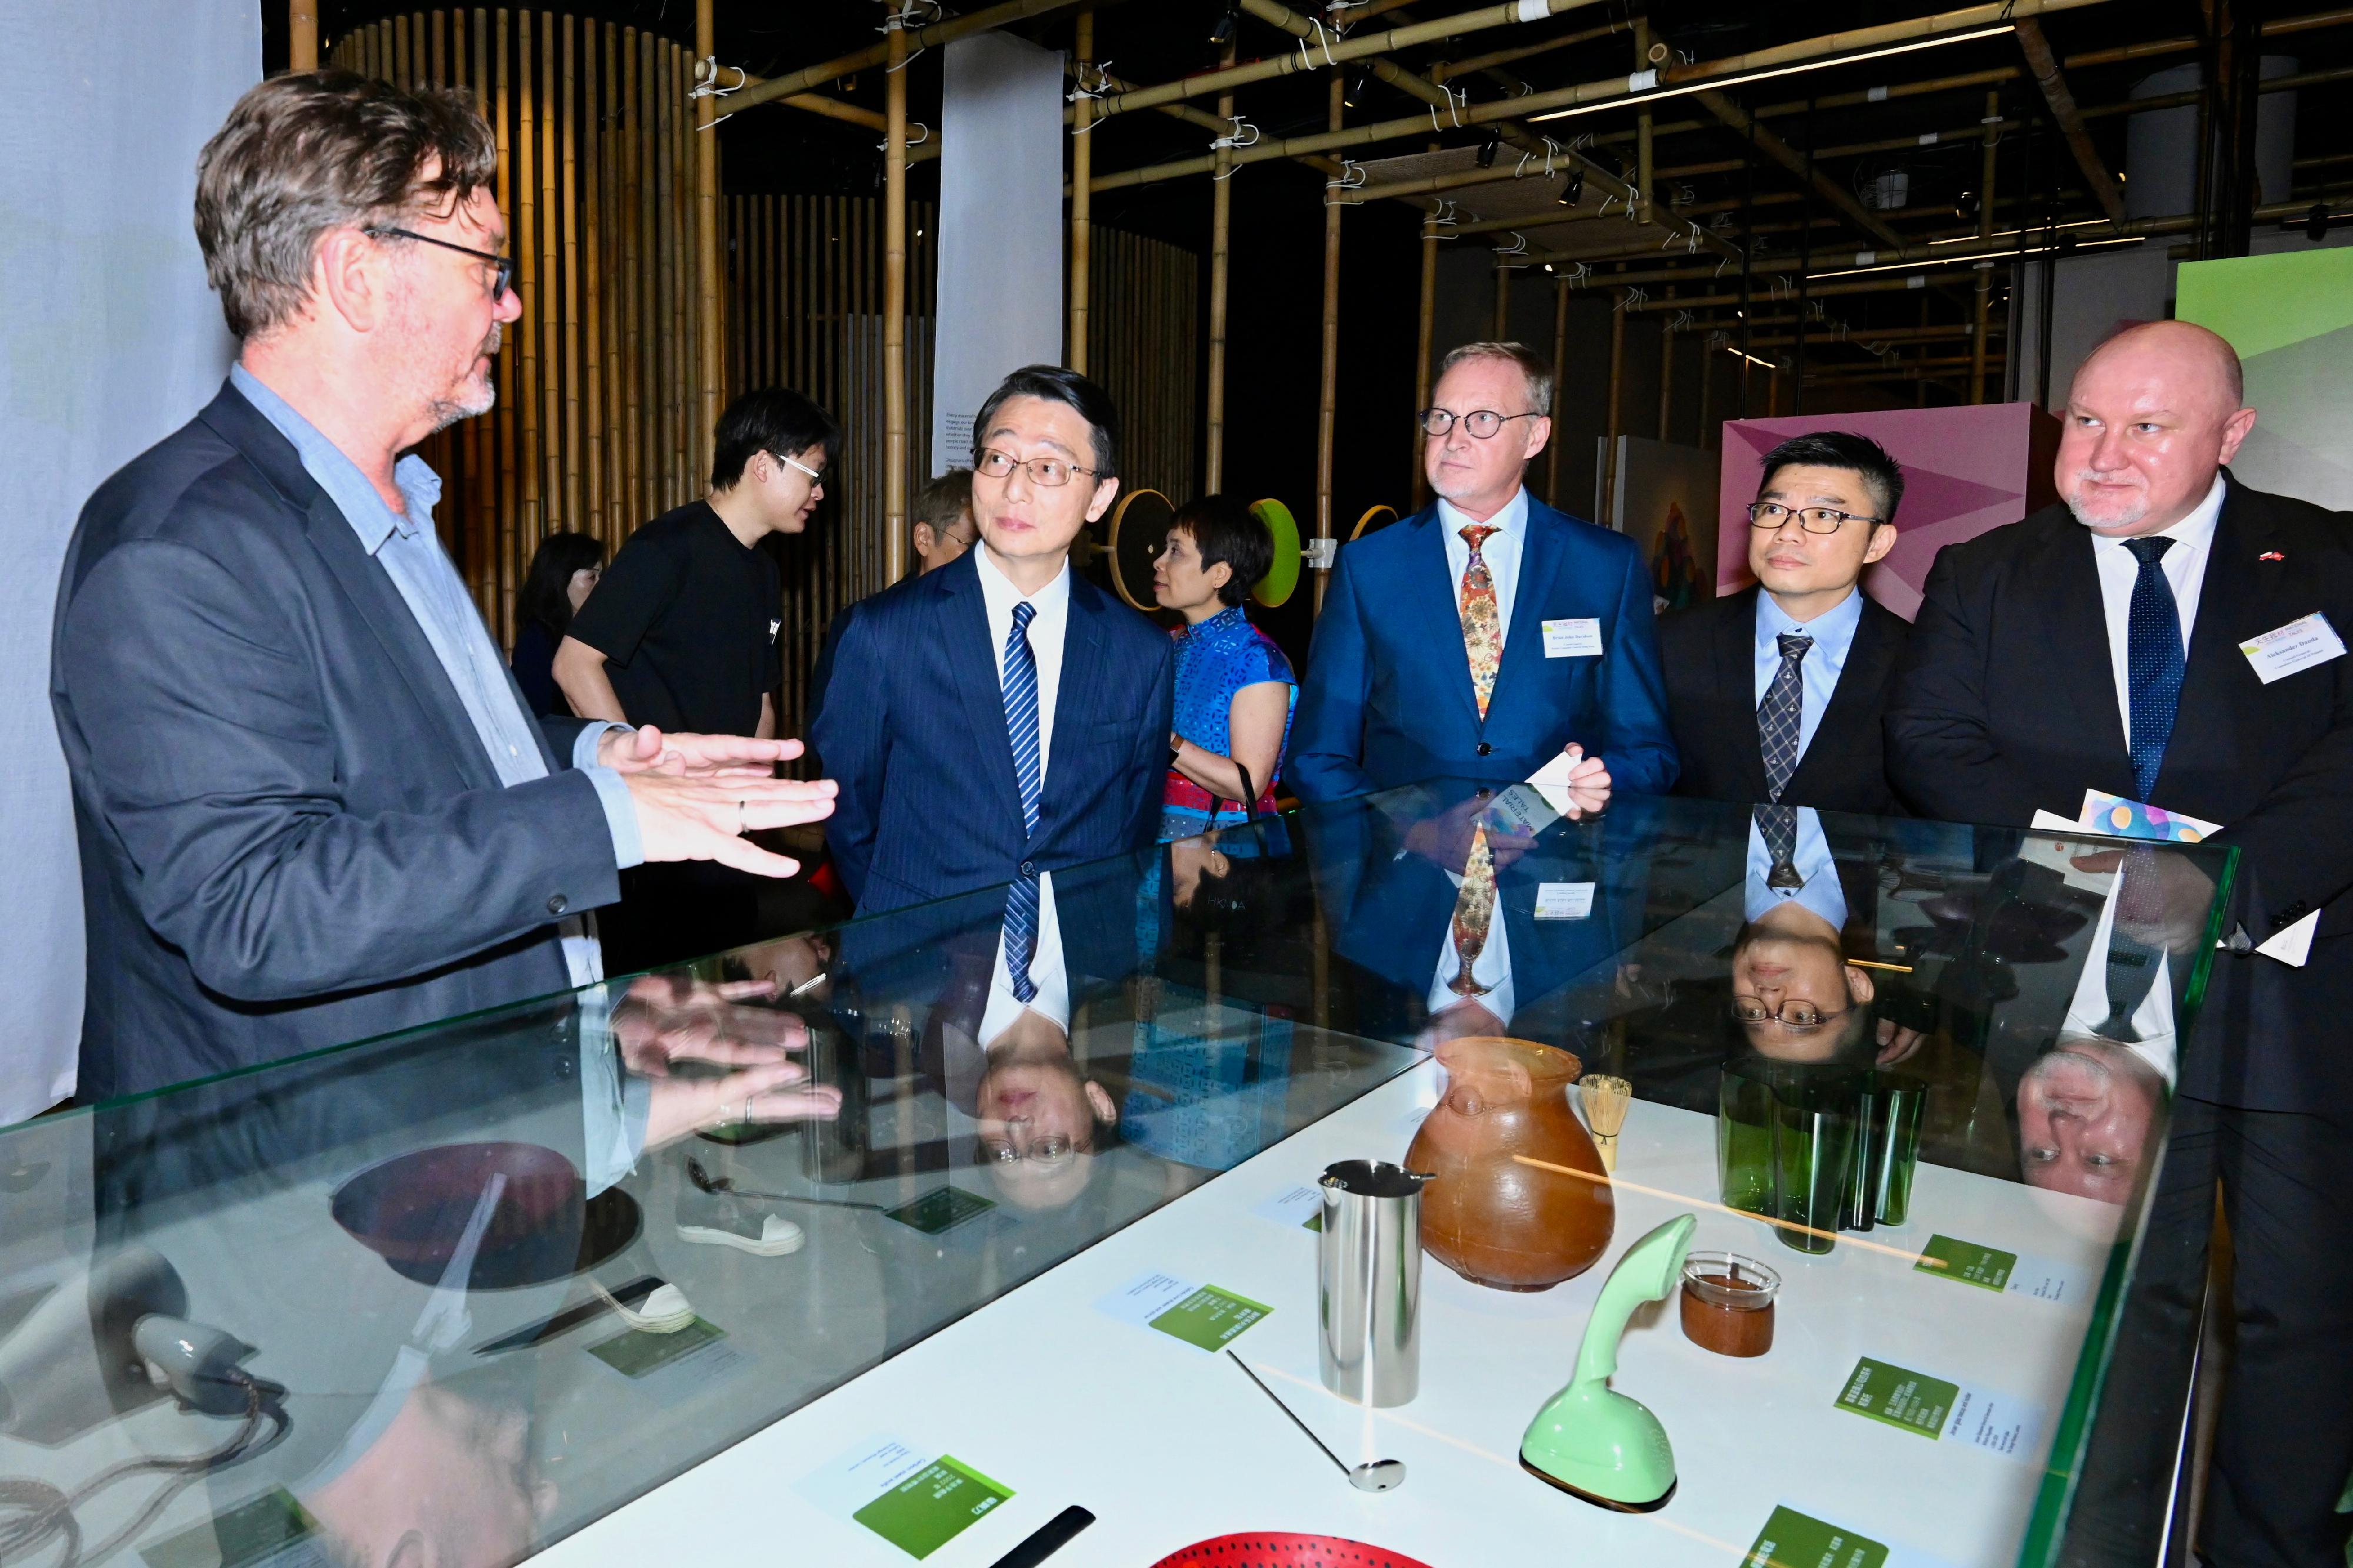 The opening ceremony for the exhibition "Material Tales - The Life of Things" was held today (May 18) at the Hong Kong Science Museum. Photo shows the Head of International Engagement of the Design Museum, London, Mr Chris Harris (first left), and the Director of Leisure and Cultural Services, Mr Vincent Liu (second left), touring the exhibition as officiating guests.